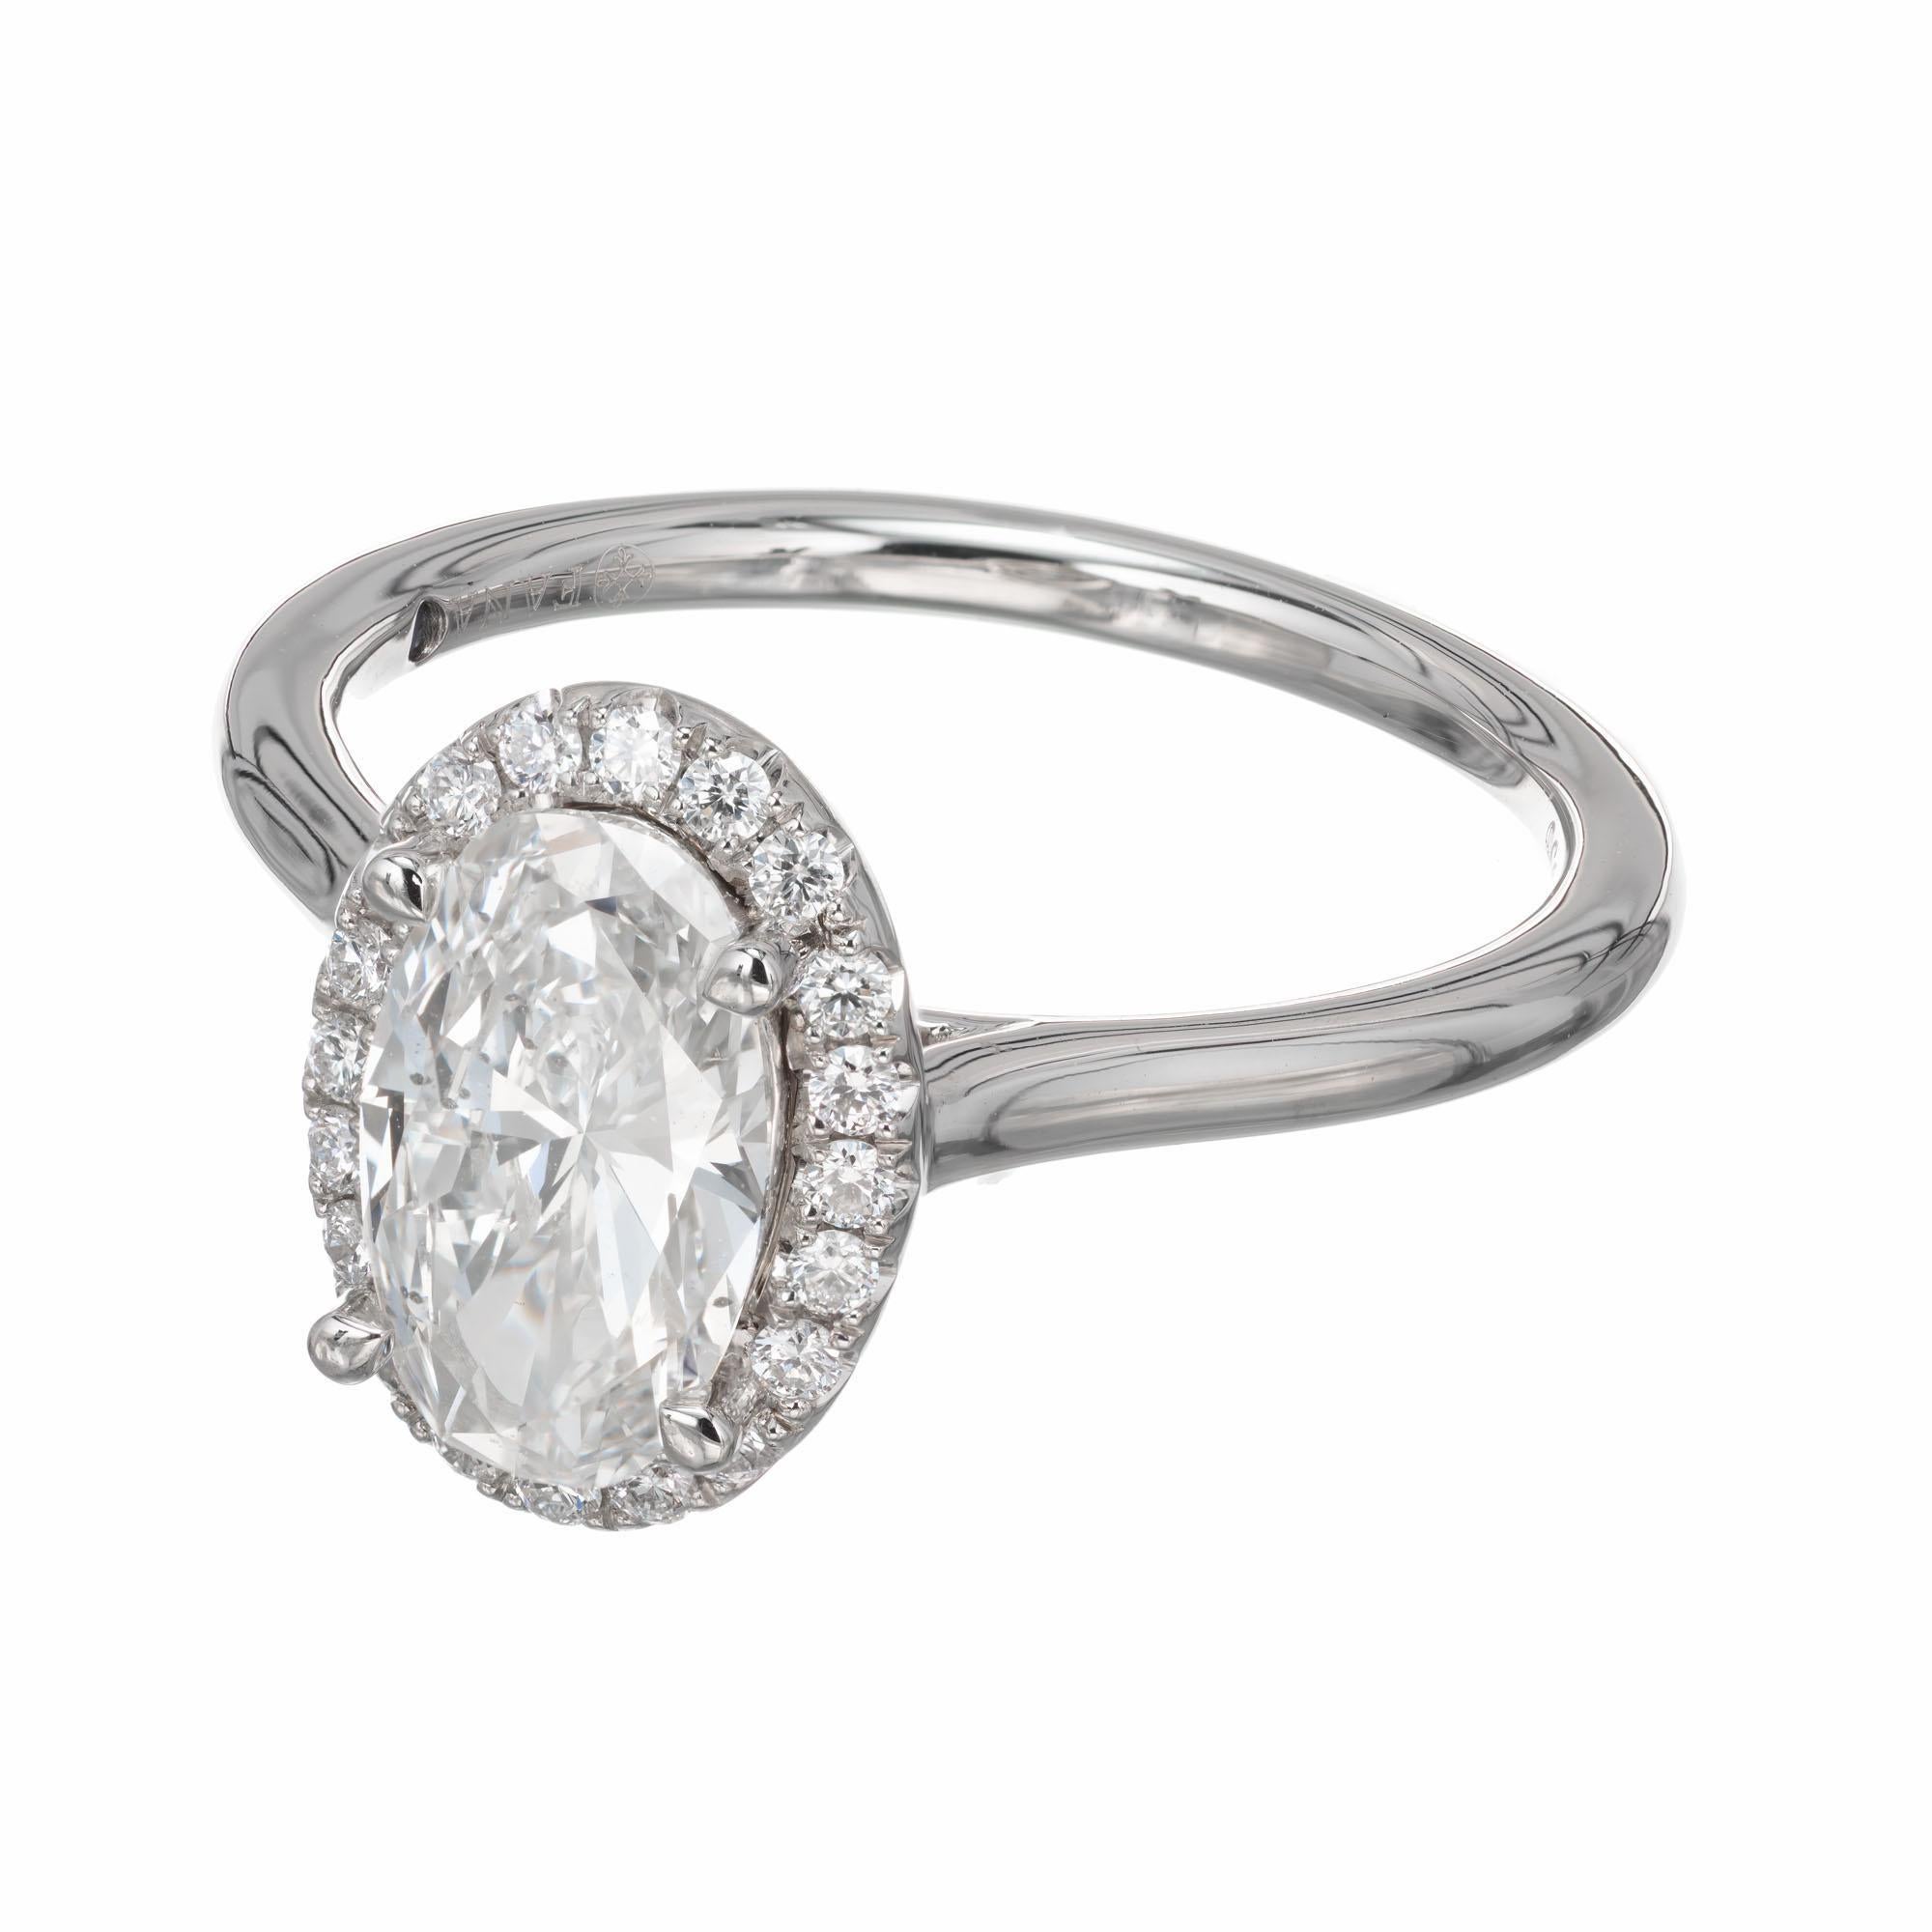 Peter Suchy oval halo diamond engagement ring. GIA certified oval center stone set in platinum with a halo of round diamonds. Crafted in the Peter Suchy Workshop.  

1 oval cut diamond I SI, approx. 1.17cts.  GIA Cert# 5202332987
22 round brilliant